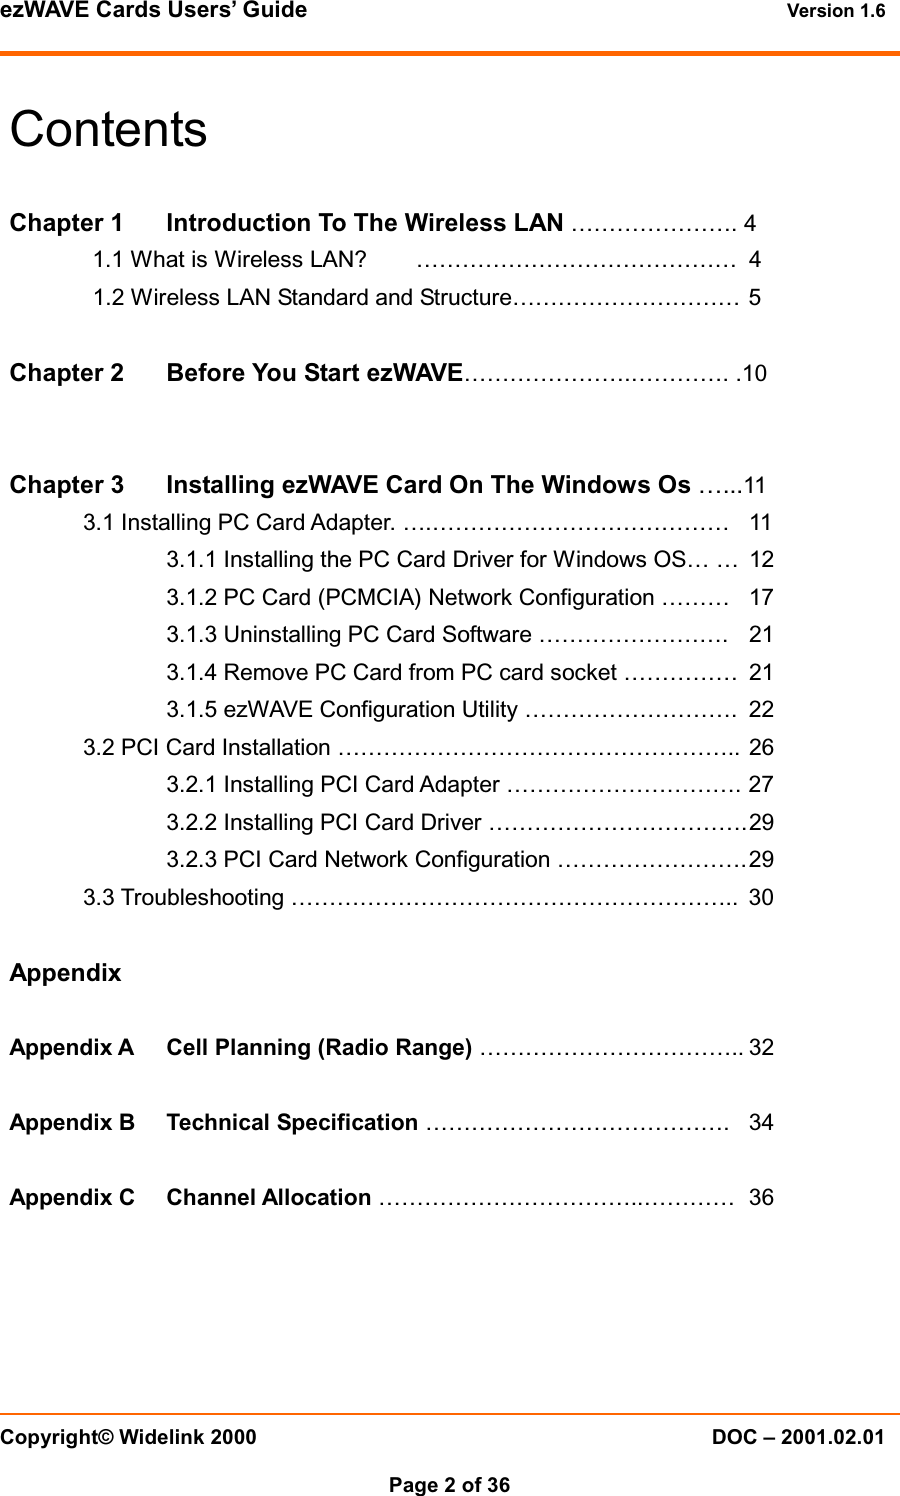 ezWAVE Cards Users’ Guide Version 1.6 Copyright© Widelink 2000 DOC – 2001.02.01Page 2 of 36 ContentsChapter 1 Introduction To The Wireless LAN …………………. 41.1 What is Wireless LAN? …………………………………… 41.2 Wireless LAN Standard and Structure………………………… 5Chapter 2 Before You Start ezWAVE………………….…………. .10Chapter 3 Installing ezWAVE Card On The Windows Os …...113.1 Installing PC Card Adapter. ….………………………………… 113.1.1 Installing the PC Card Driver for Windows OS… … 123.1.2 PC Card (PCMCIA) Network Configuration ……… 173.1.3 Uninstalling PC Card Software ……………………. 213.1.4 Remove PC Card from PC card socket …………… 213.1.5 ezWAVE Configuration Utility ………………………. 223.2 PCI Card Installation …………………………………………….. 263.2.1 Installing PCI Card Adapter …………………………. 273.2.2 Installing PCI Card Driver …………………………….293.2.3 PCI Card Network Configuration …………………….293.3 Troubleshooting ………………………………………………….. 30AppendixAppendix A Cell Planning (Radio Range) …………………………….. 32Appendix B Technical Specification …………………………………. 34Appendix C Channel Allocation ……………………………..………… 36